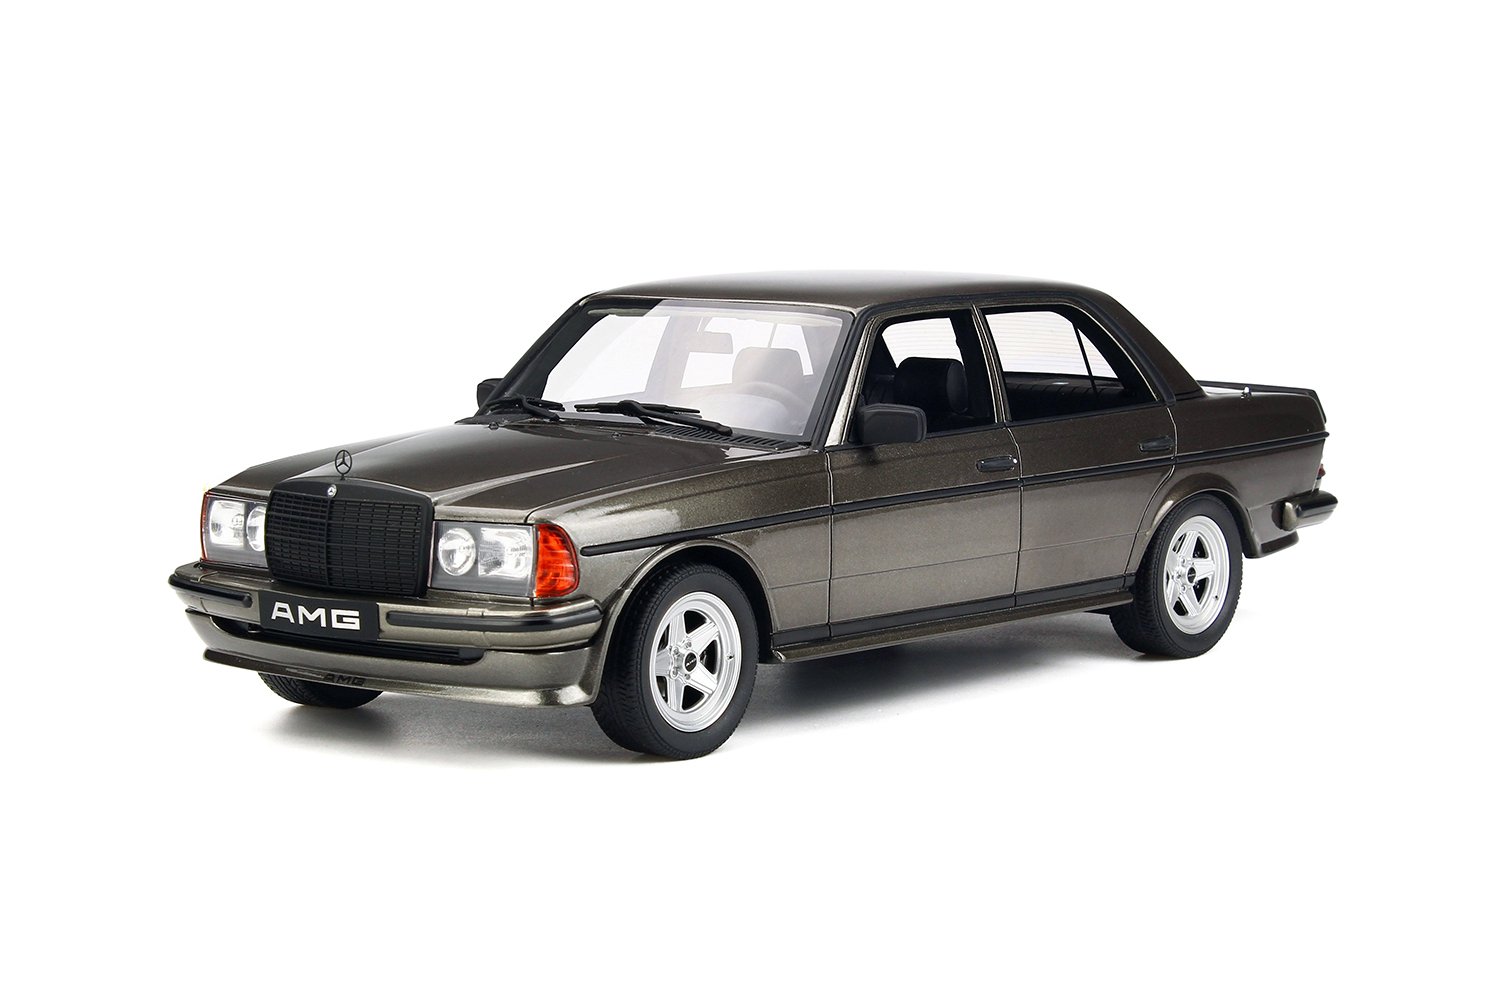 Mercedes Benz W123 Amg 280 Anthracite Gray Limited Edition To 1500 Pieces Worldwide 1/18 Model Car By Otto Mobile